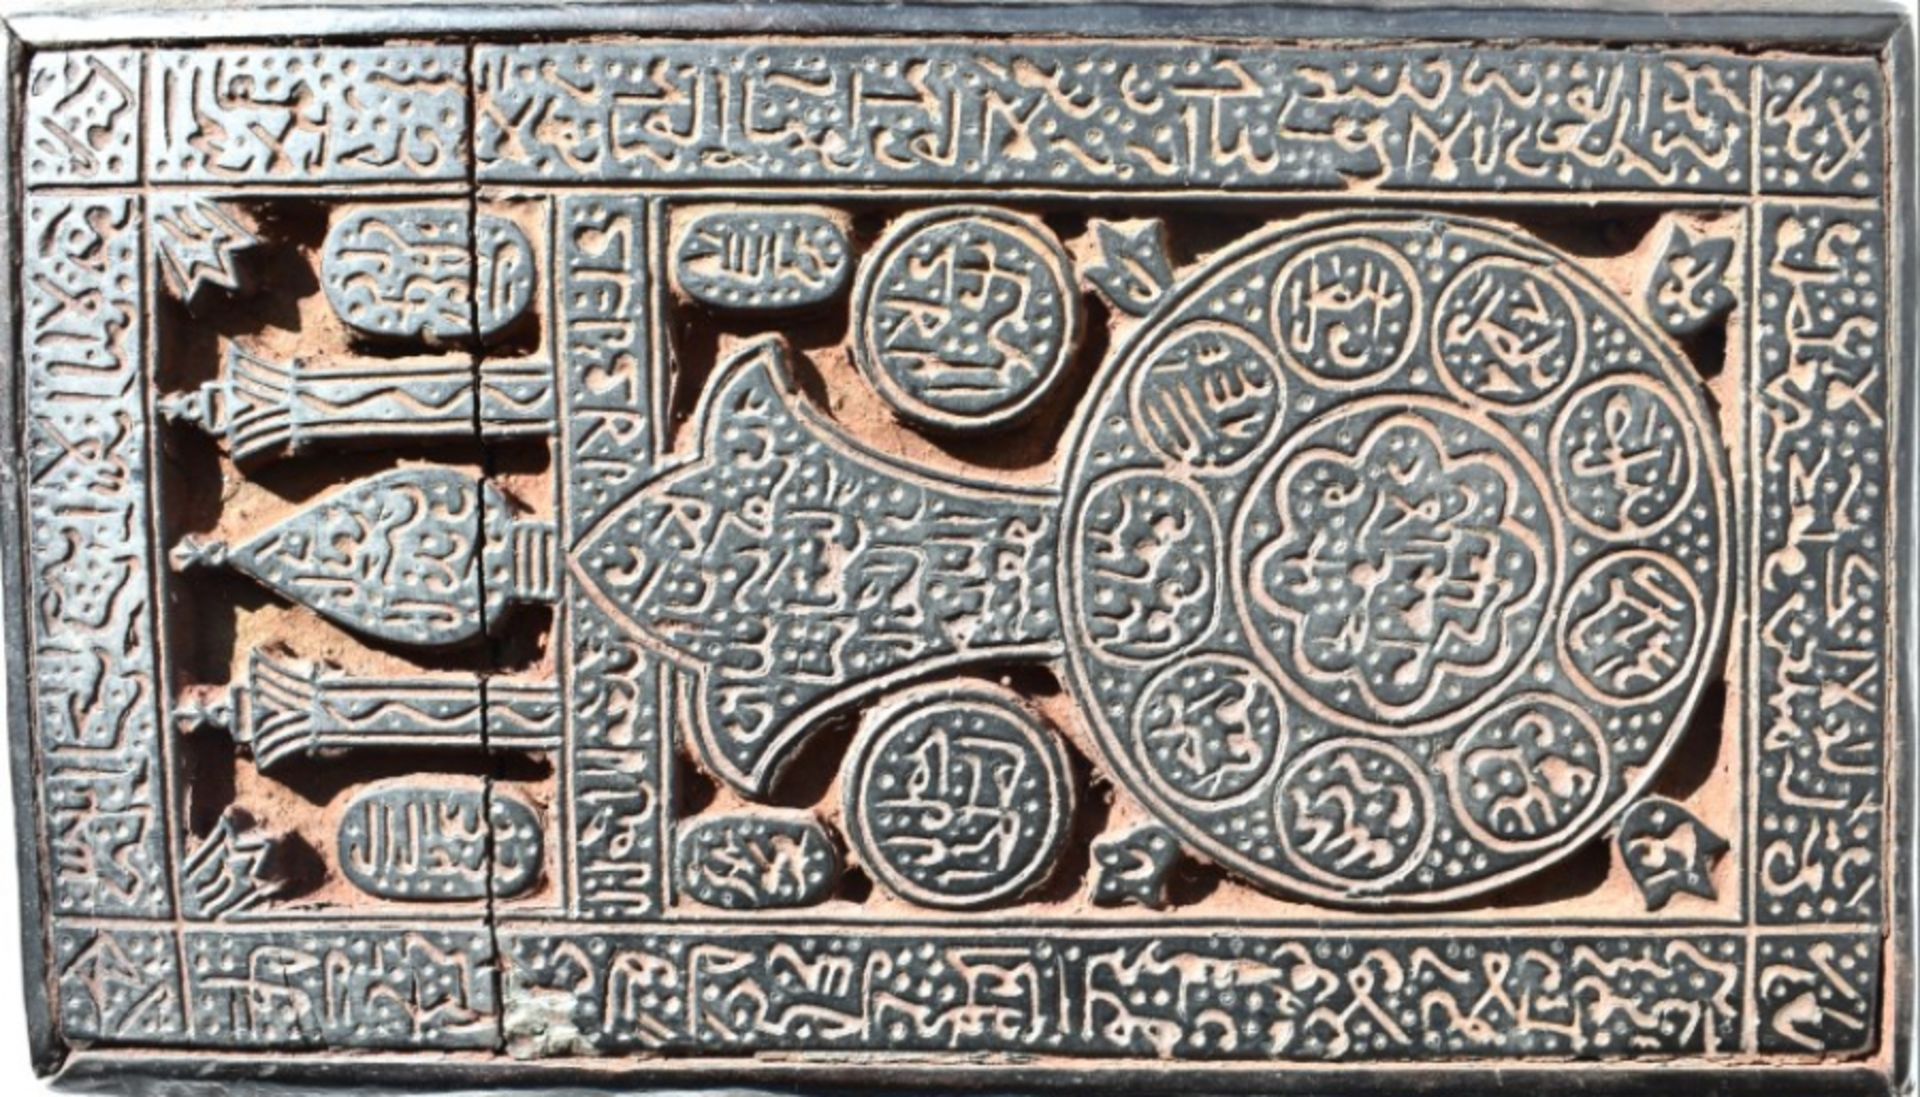 1800 Persian carved wooden Etching block - Image 4 of 5